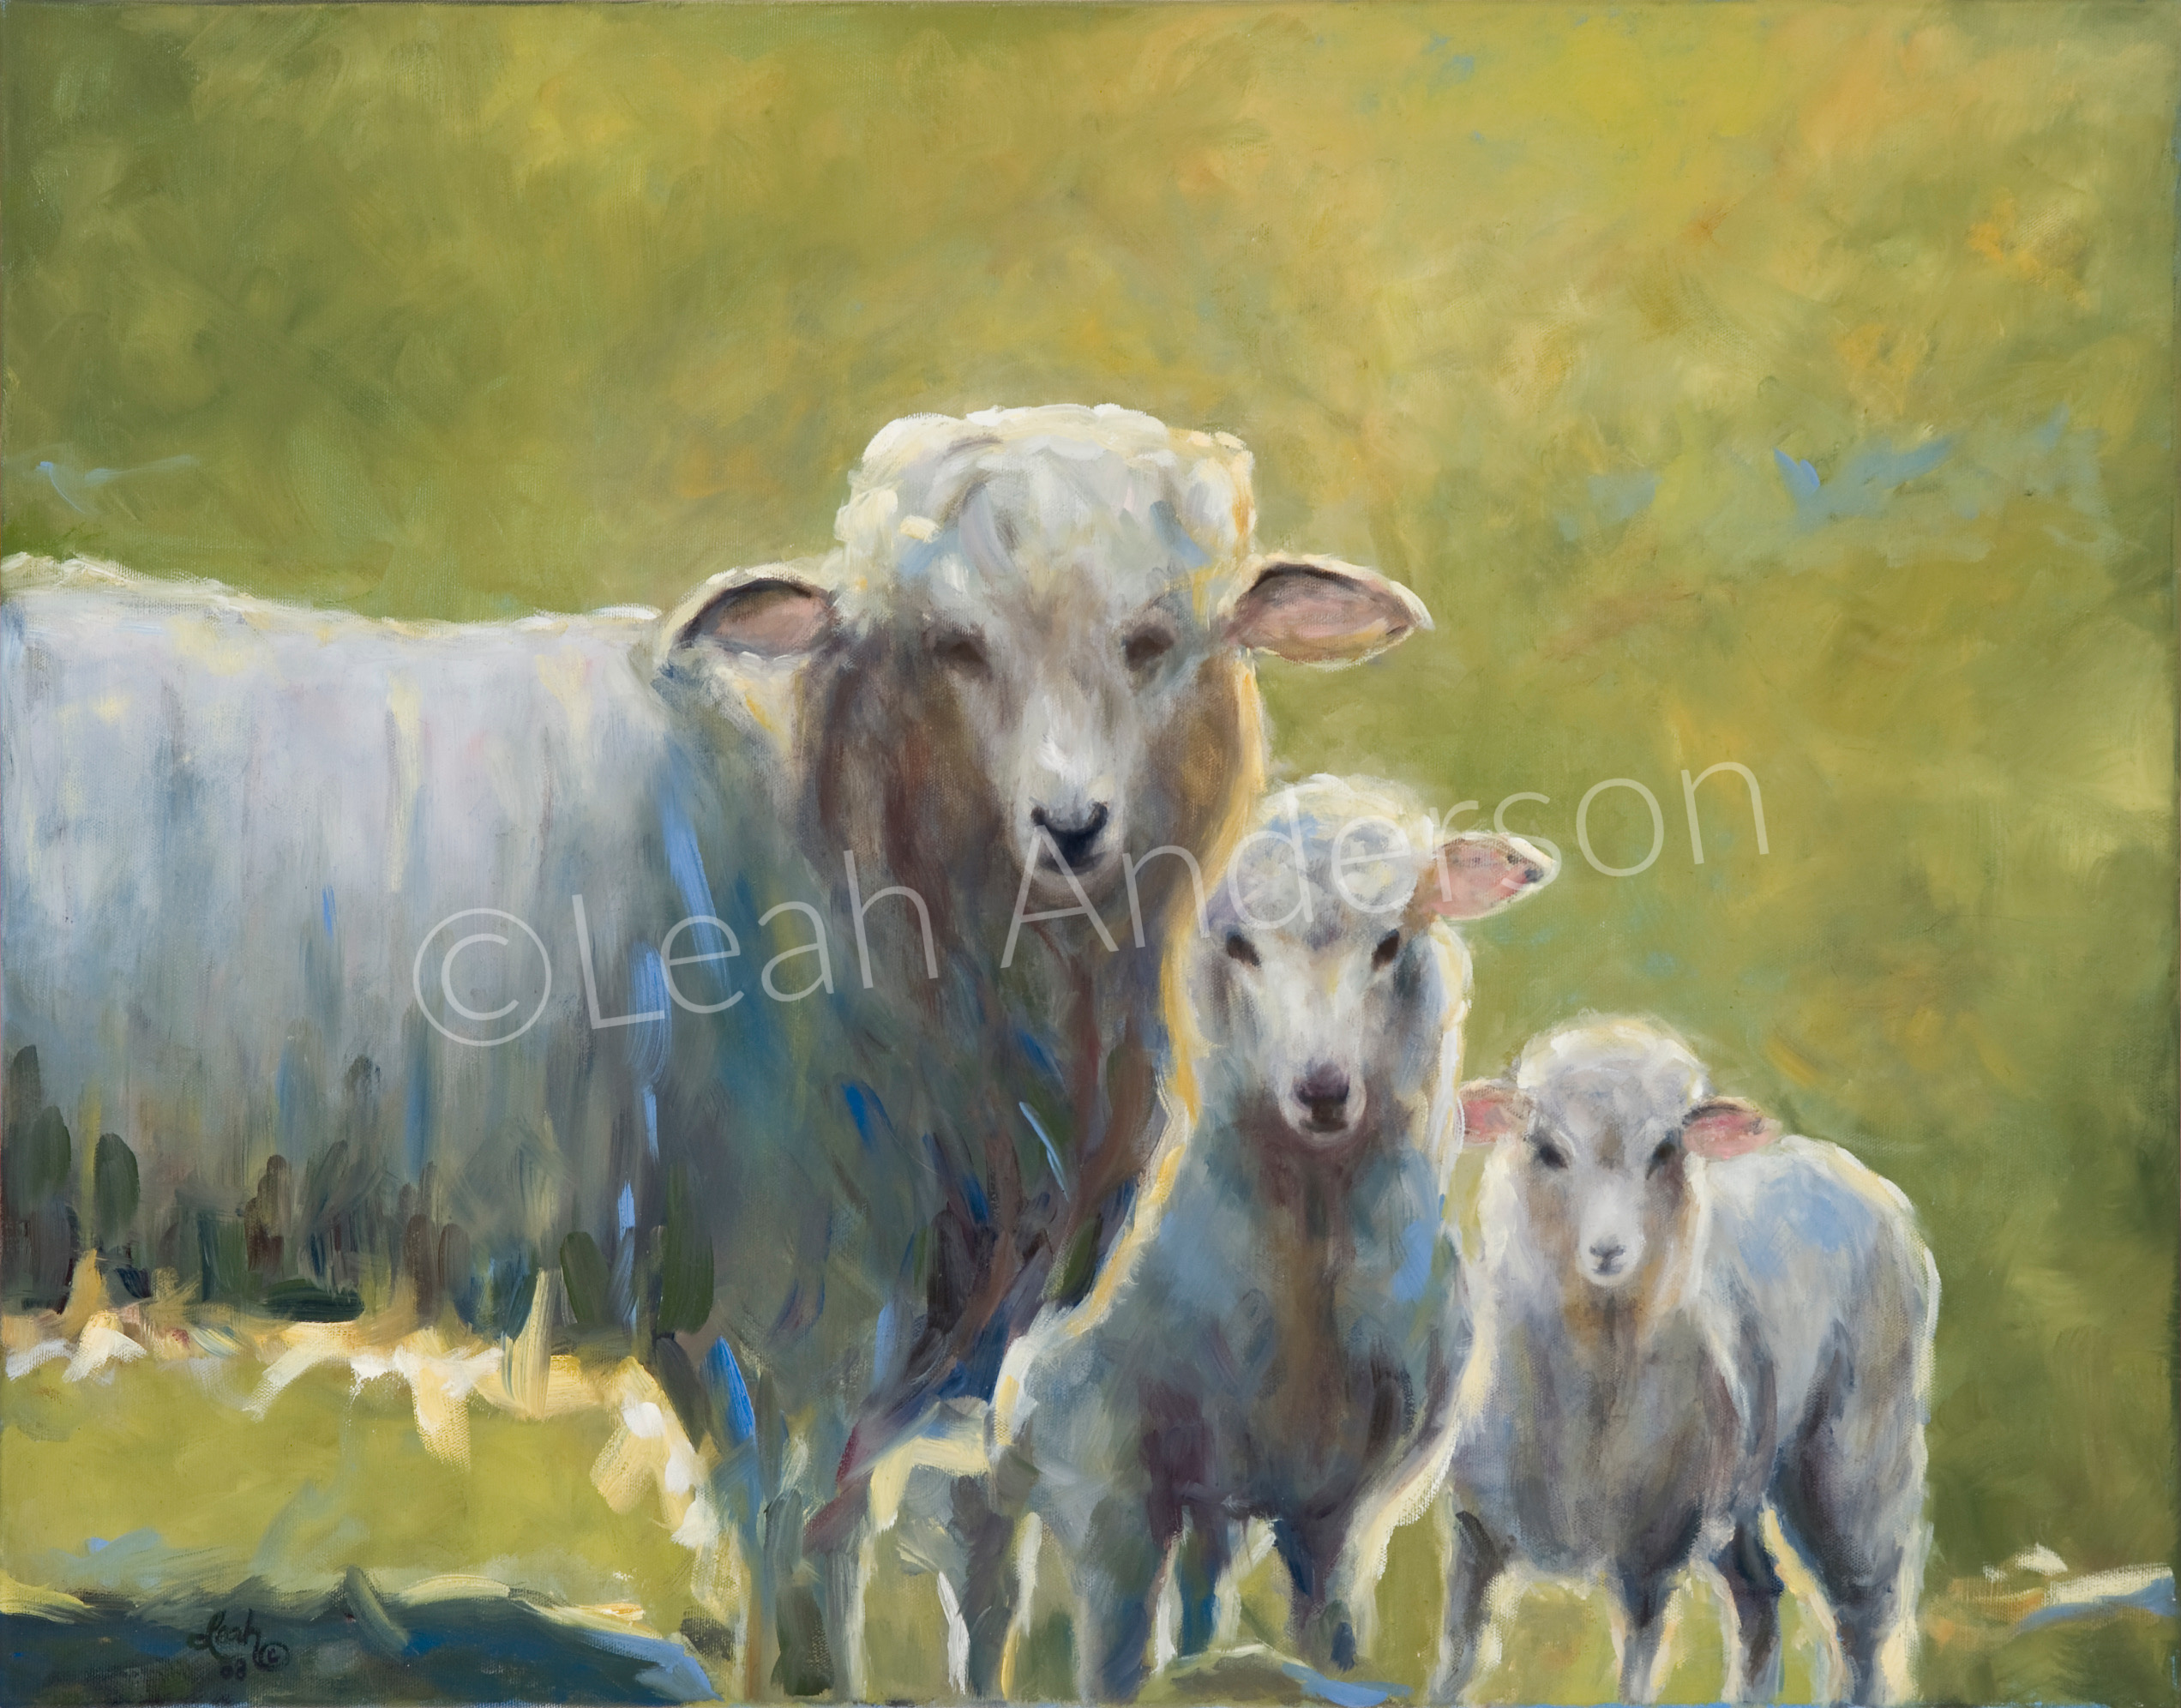 Three Sheep painting by Leah Anderson.